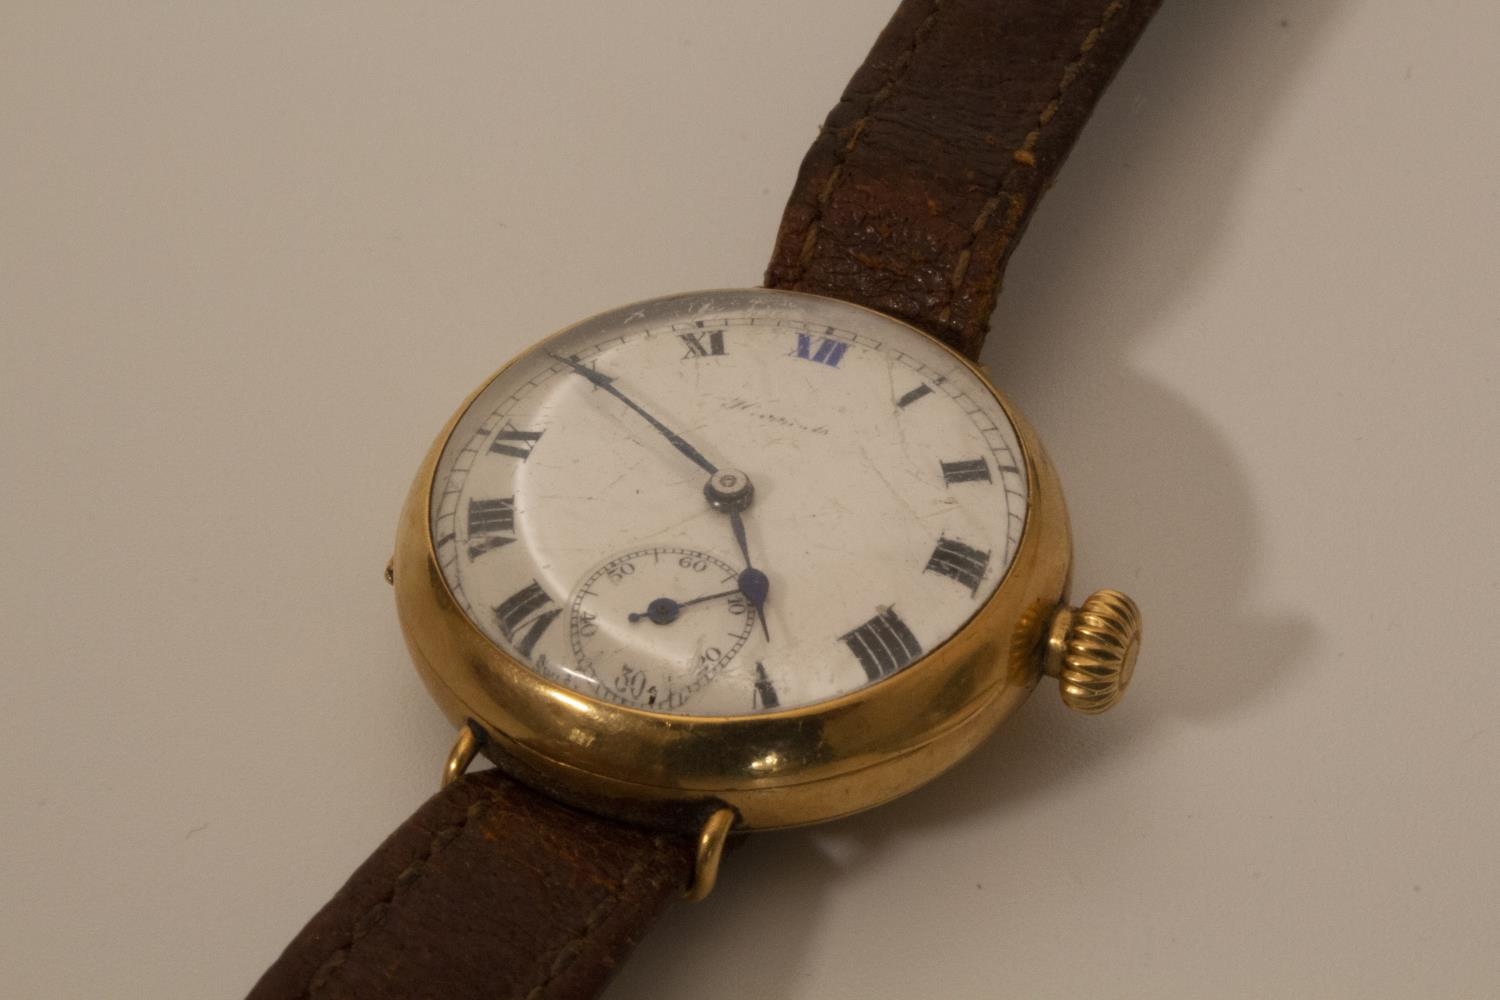 A lady's wrist watch gold colour with enamel dial and Arabic numerals